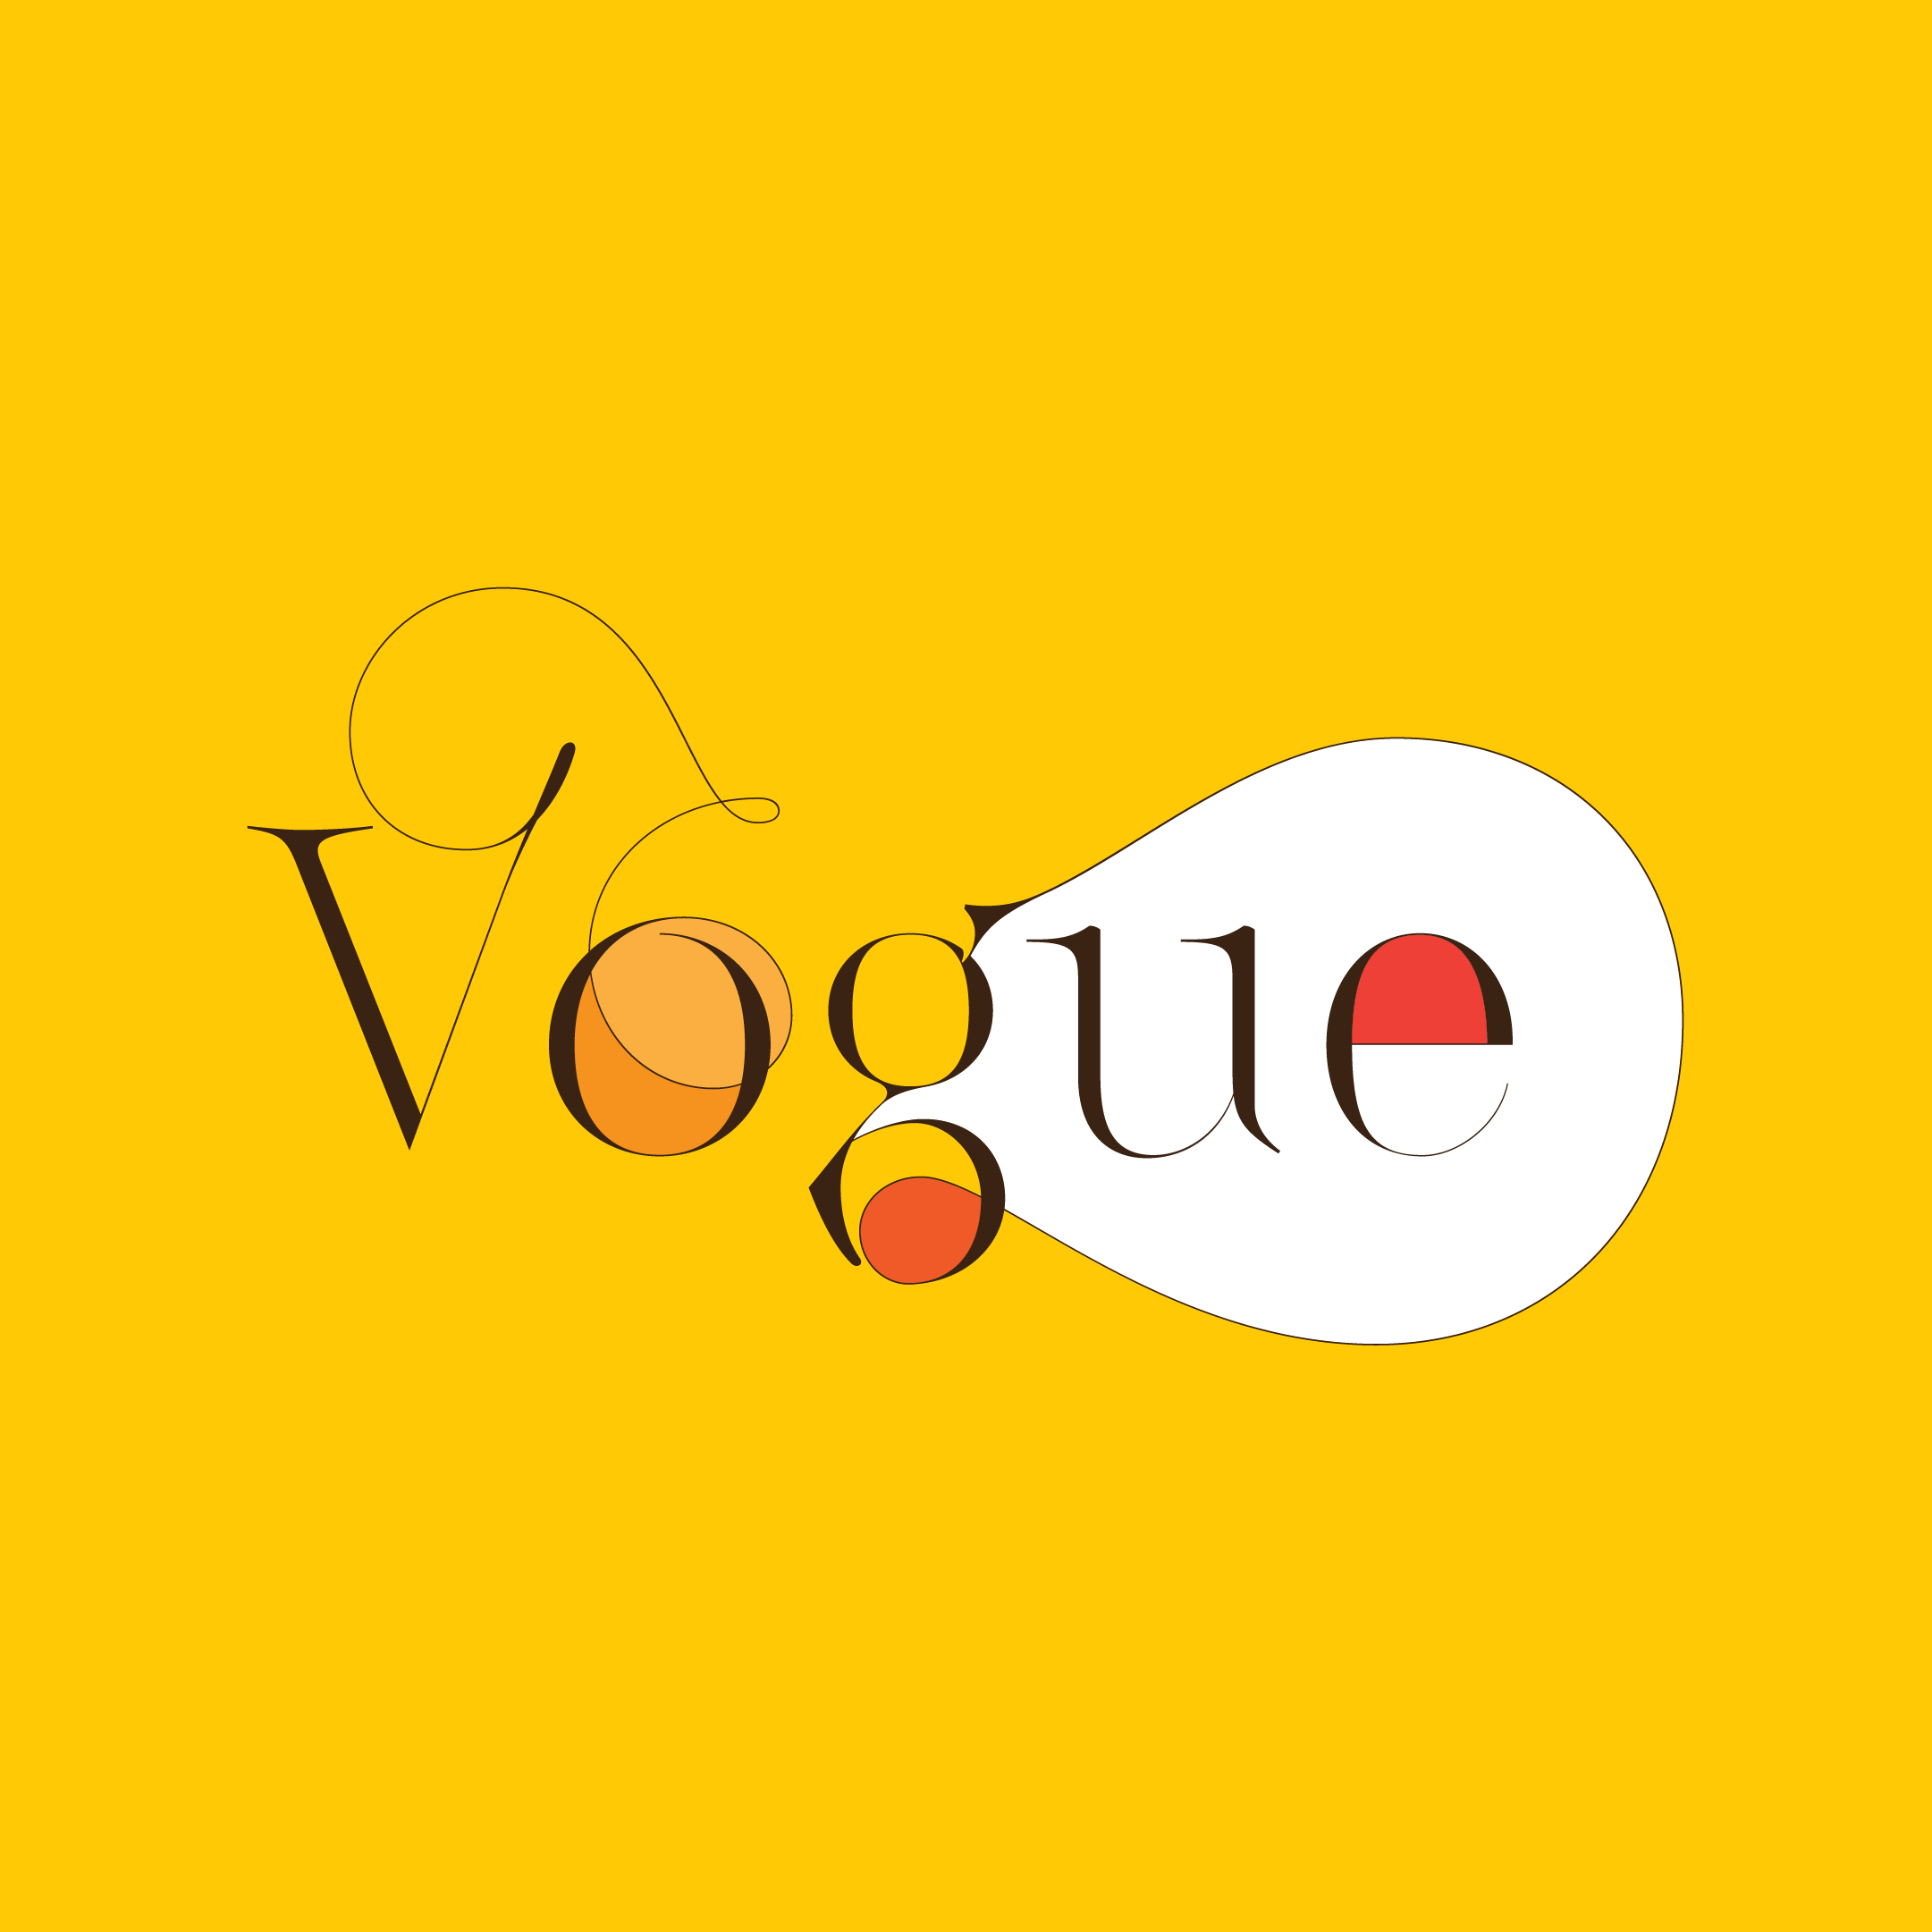 Vogue fonts, Lingerie XO, Sexy fonts, Sexy Typeface, Sexy Typography, Fashion Fonts, Fashion Typeface, Fashion Typography, Vogue fonts, Must have fonts 2023, Best fonts 2023, Fashion magazines fonts